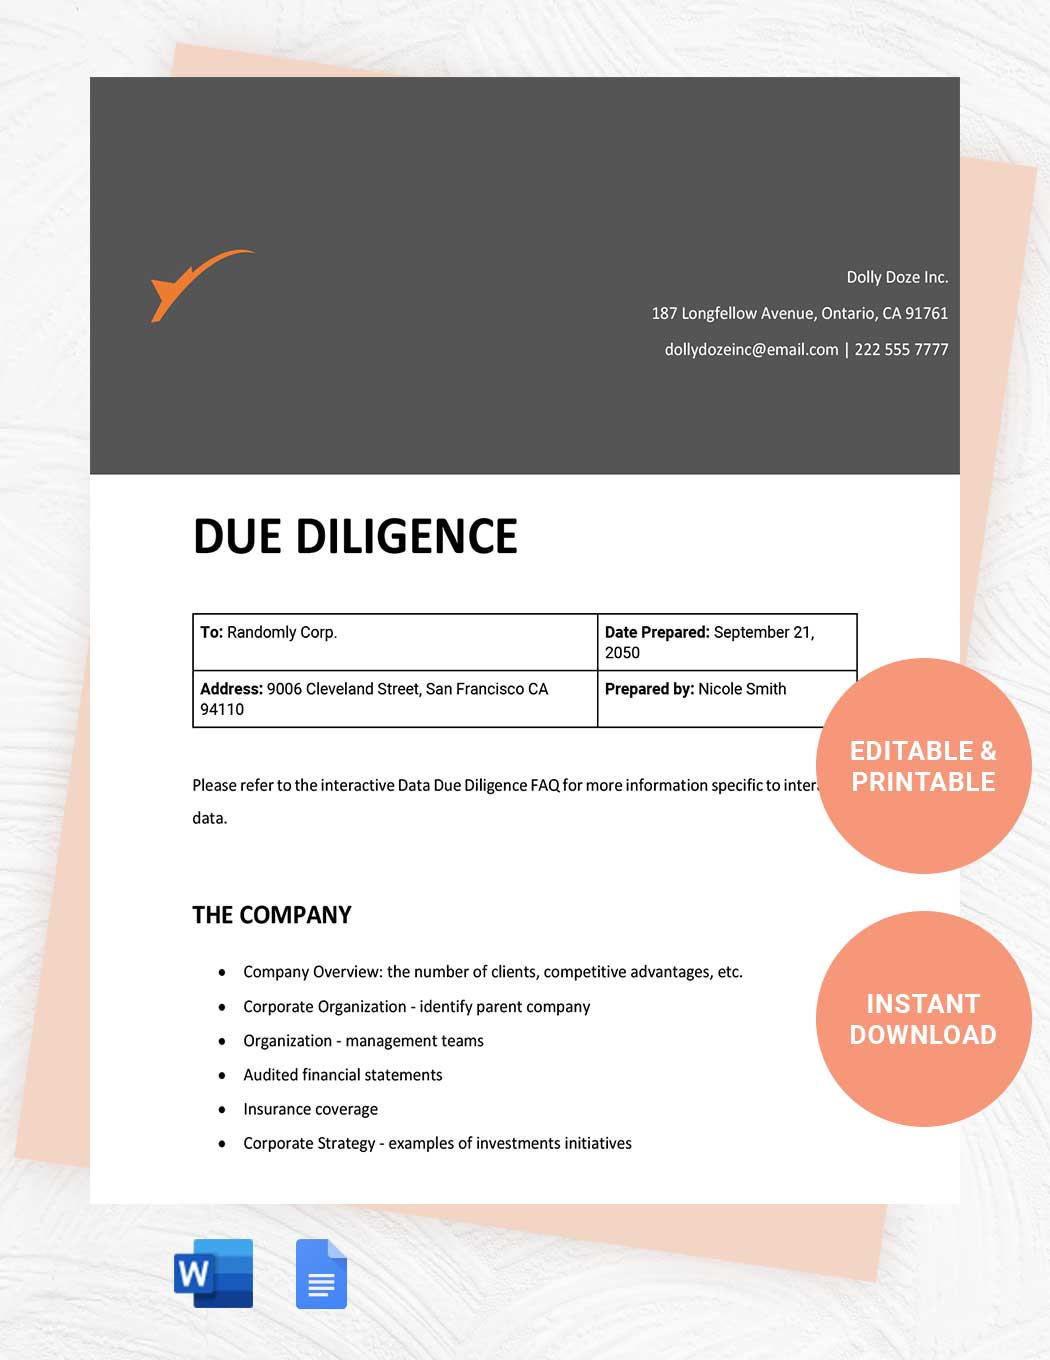 Due Diligence  in Word, Google Docs, Apple Pages